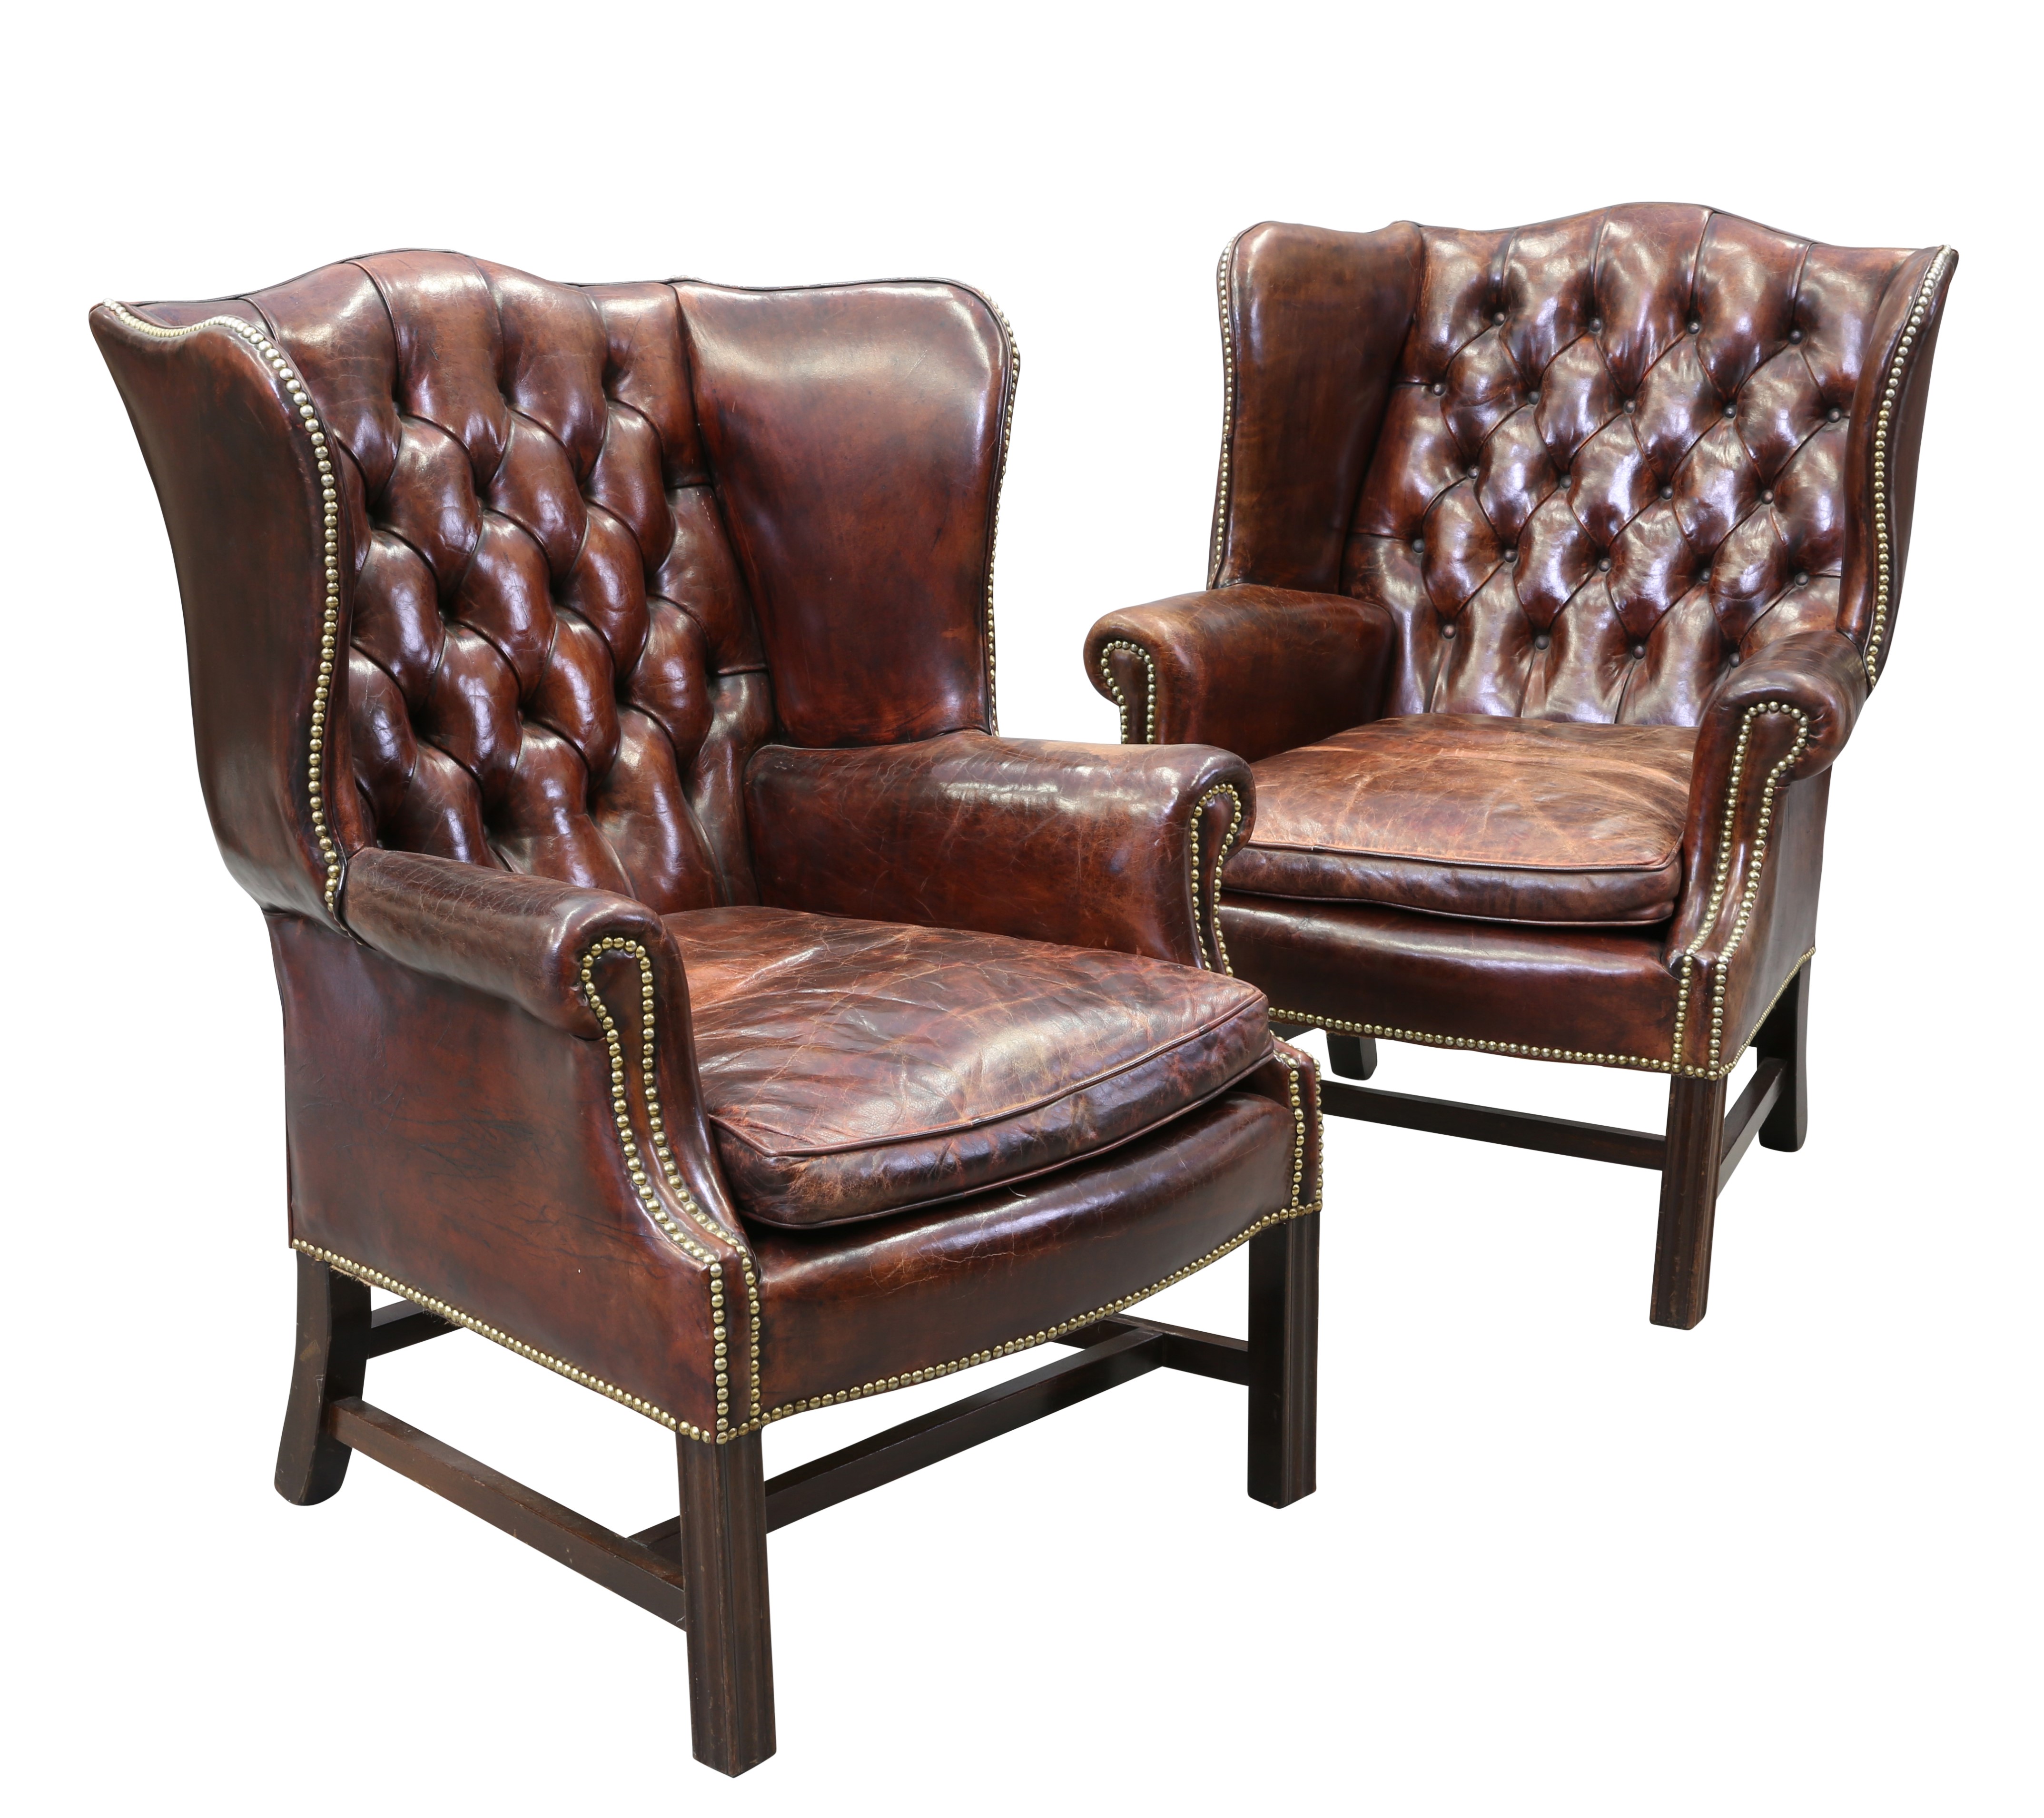 A PAIR OF GEORGIAN STYLE LEATHER WING CHAIRS